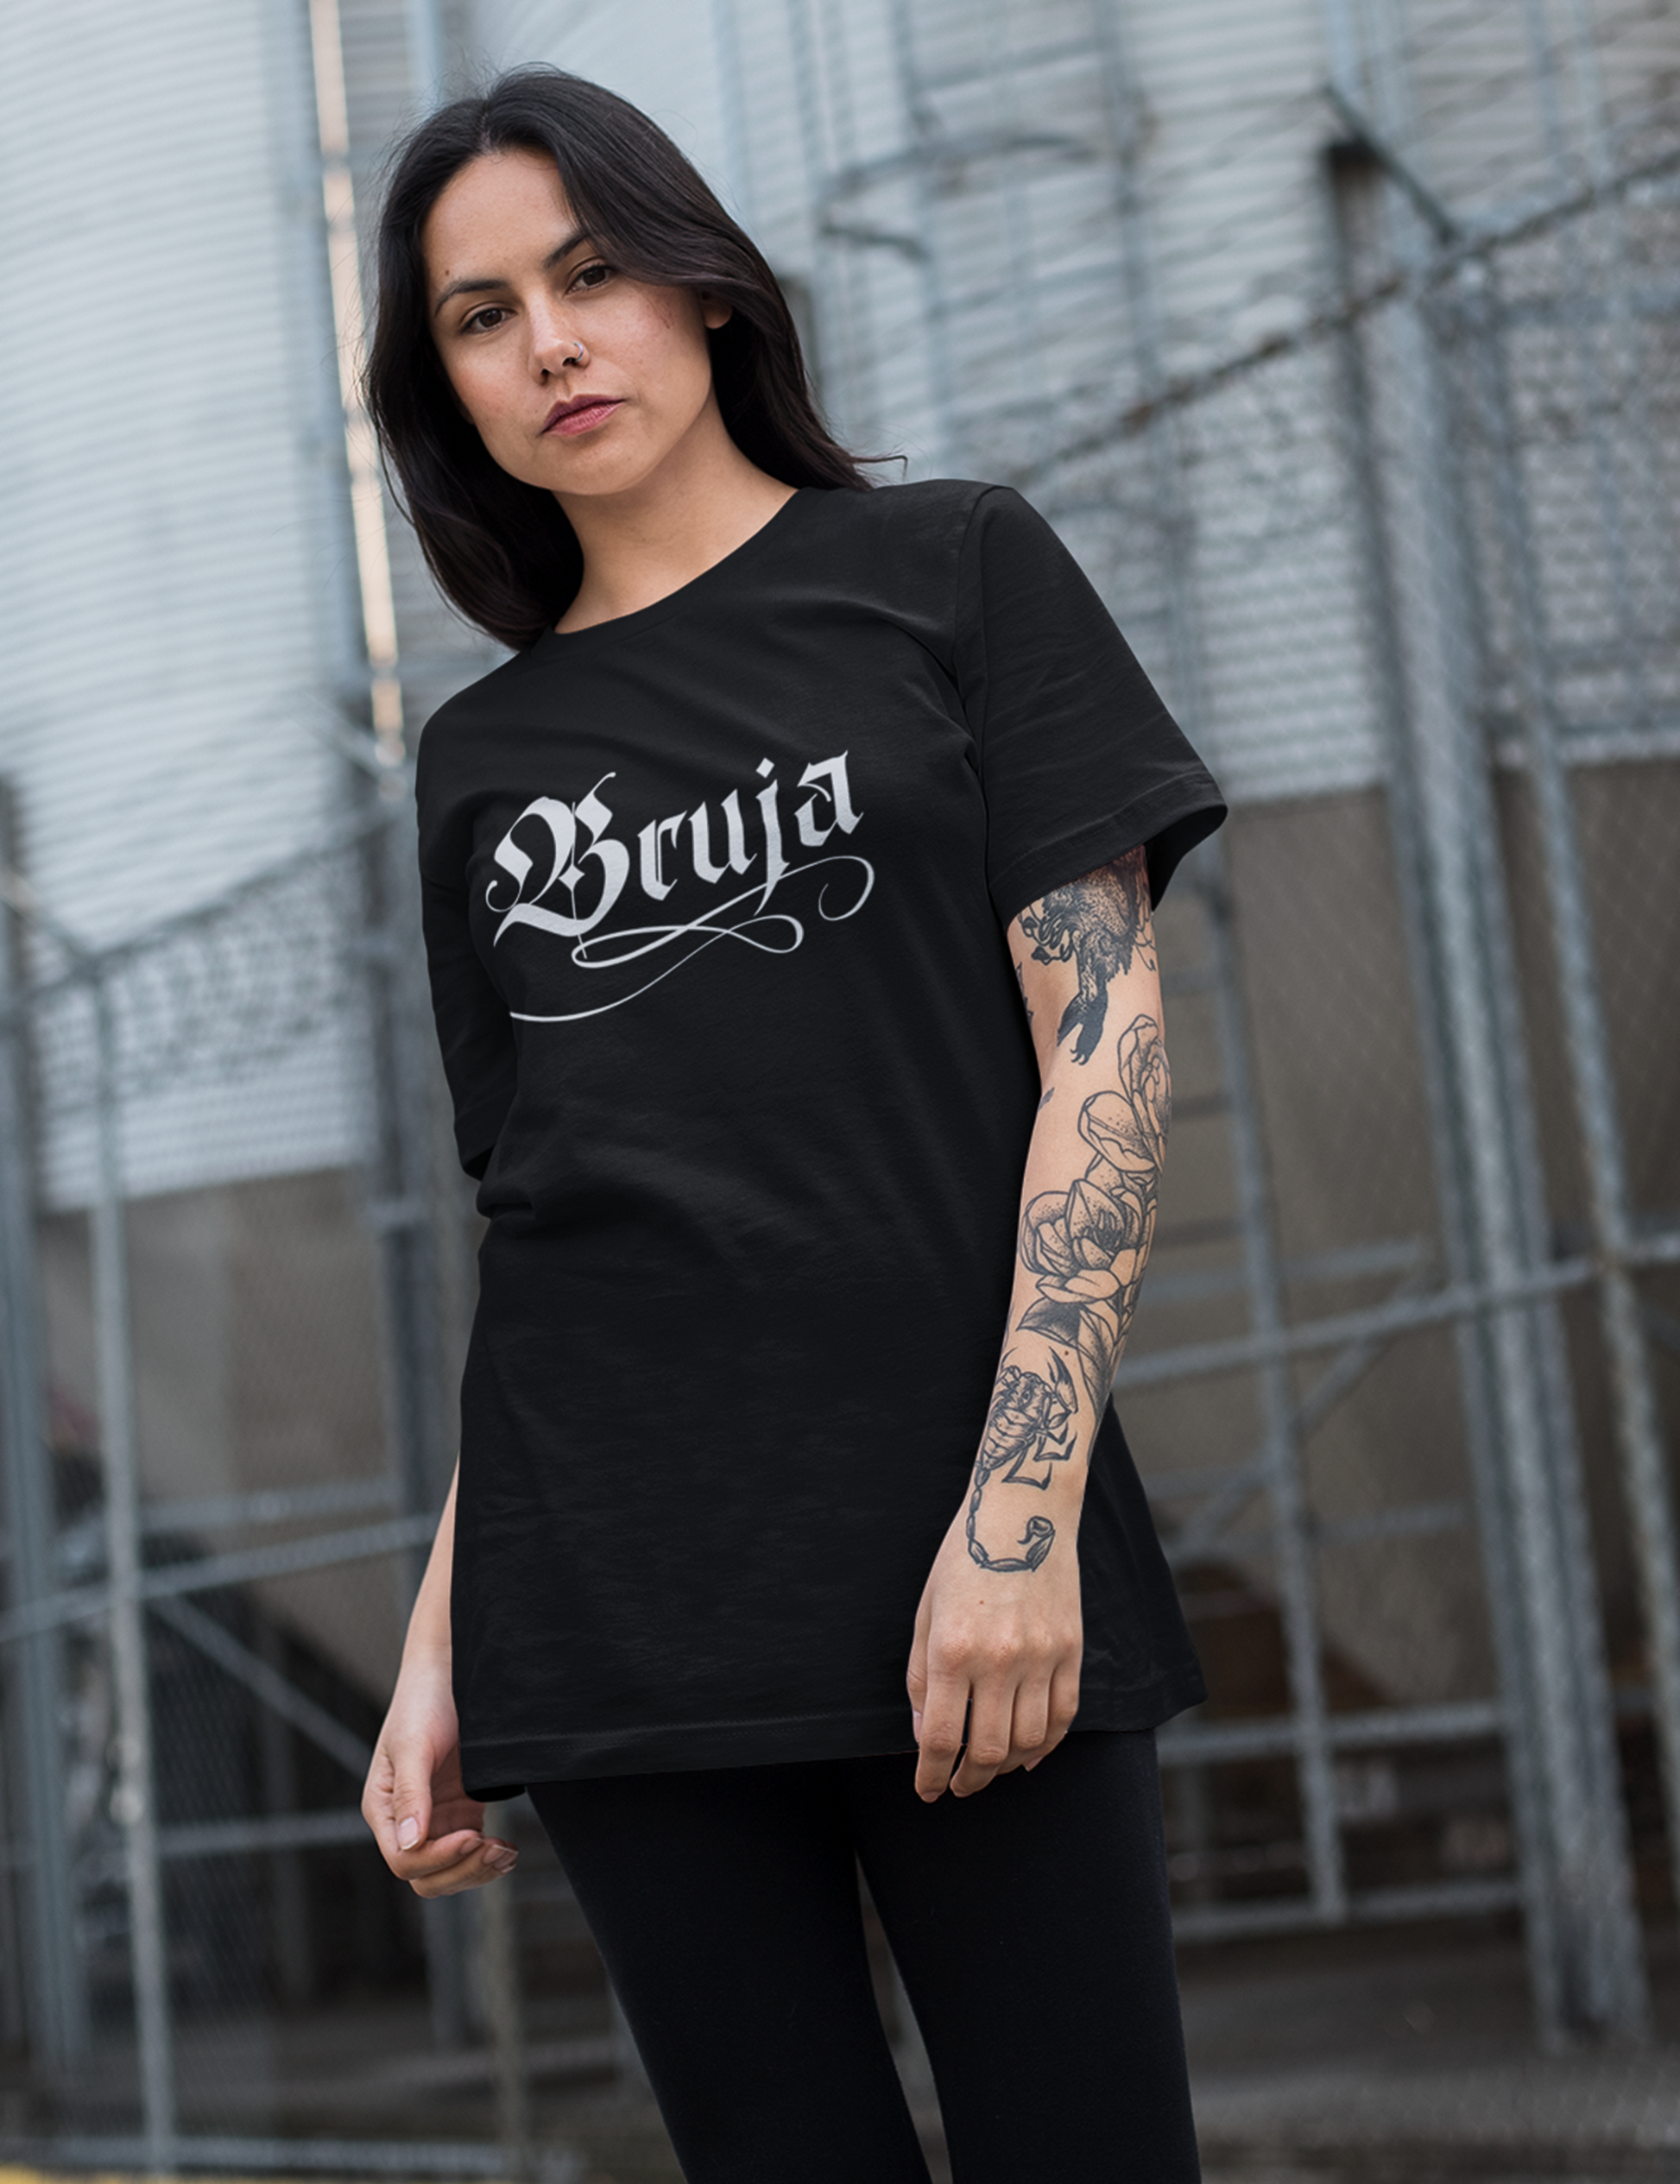 Bruja Plus Size Goth Witch Aesthetic Clothing Shirt